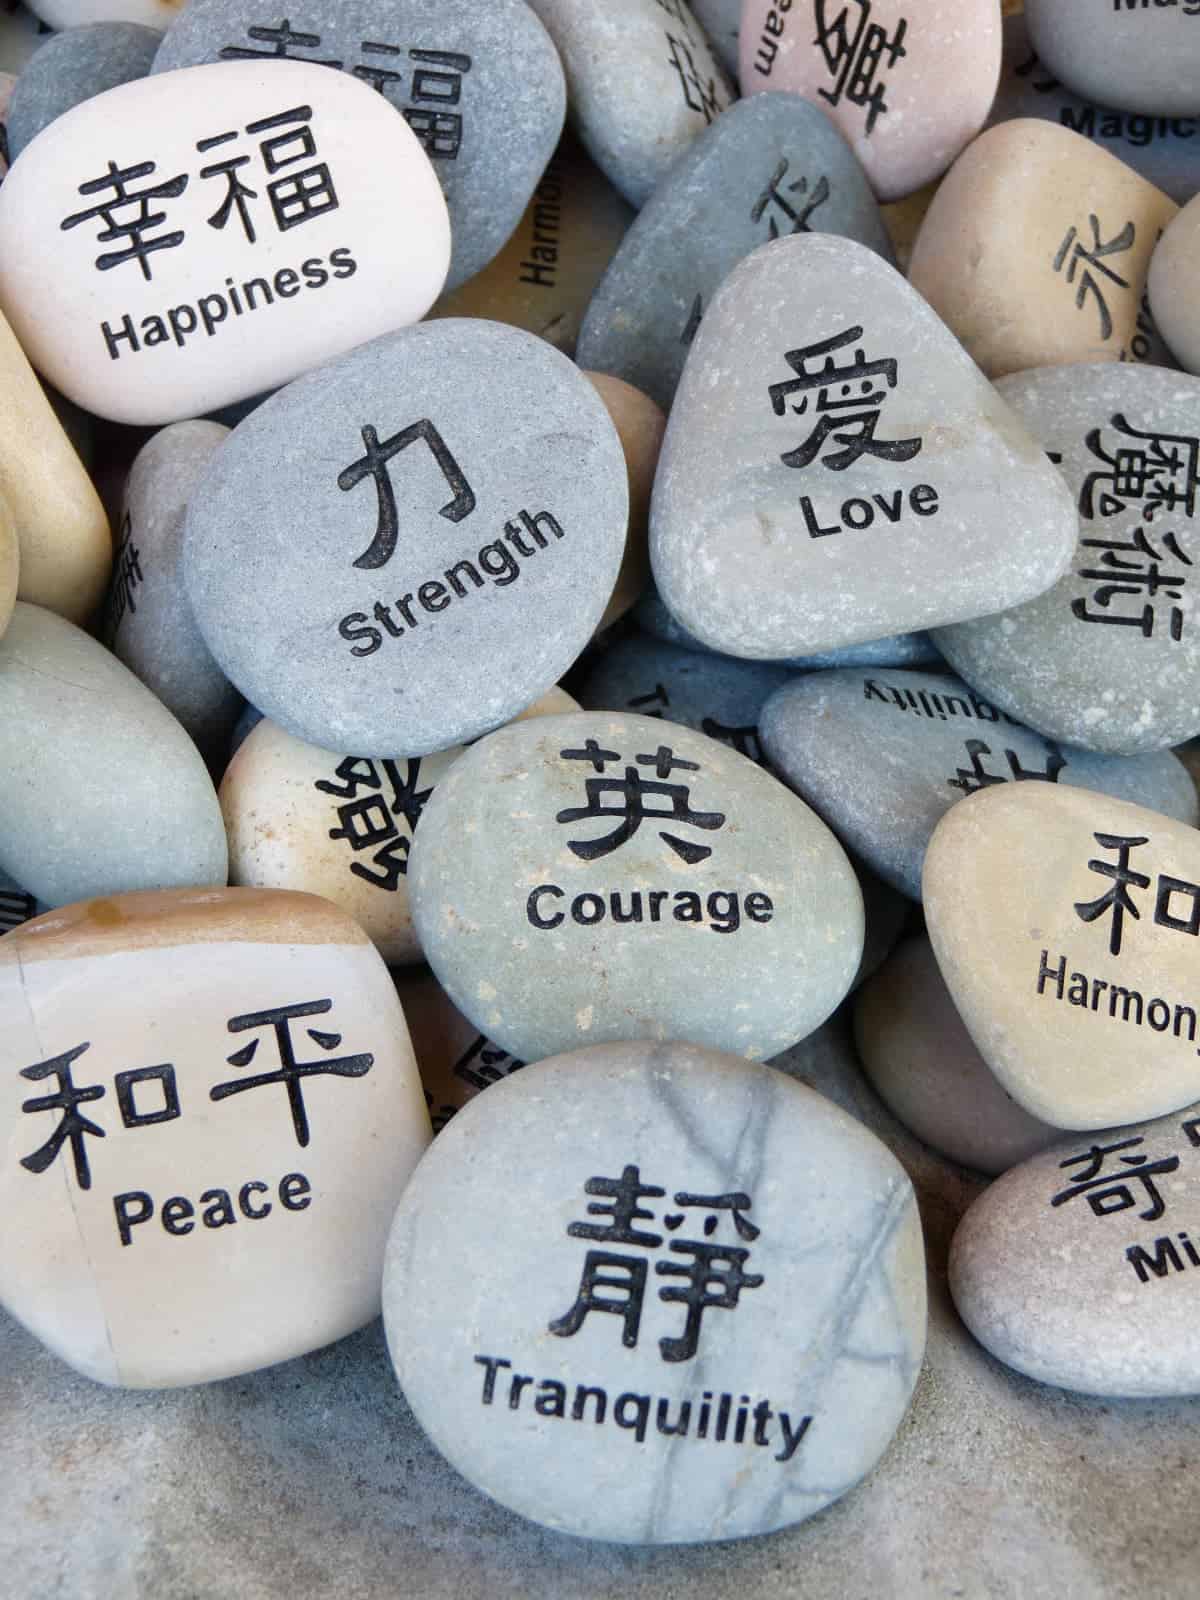 Inspirational words and Asian characters written on pile of colorful rocks.